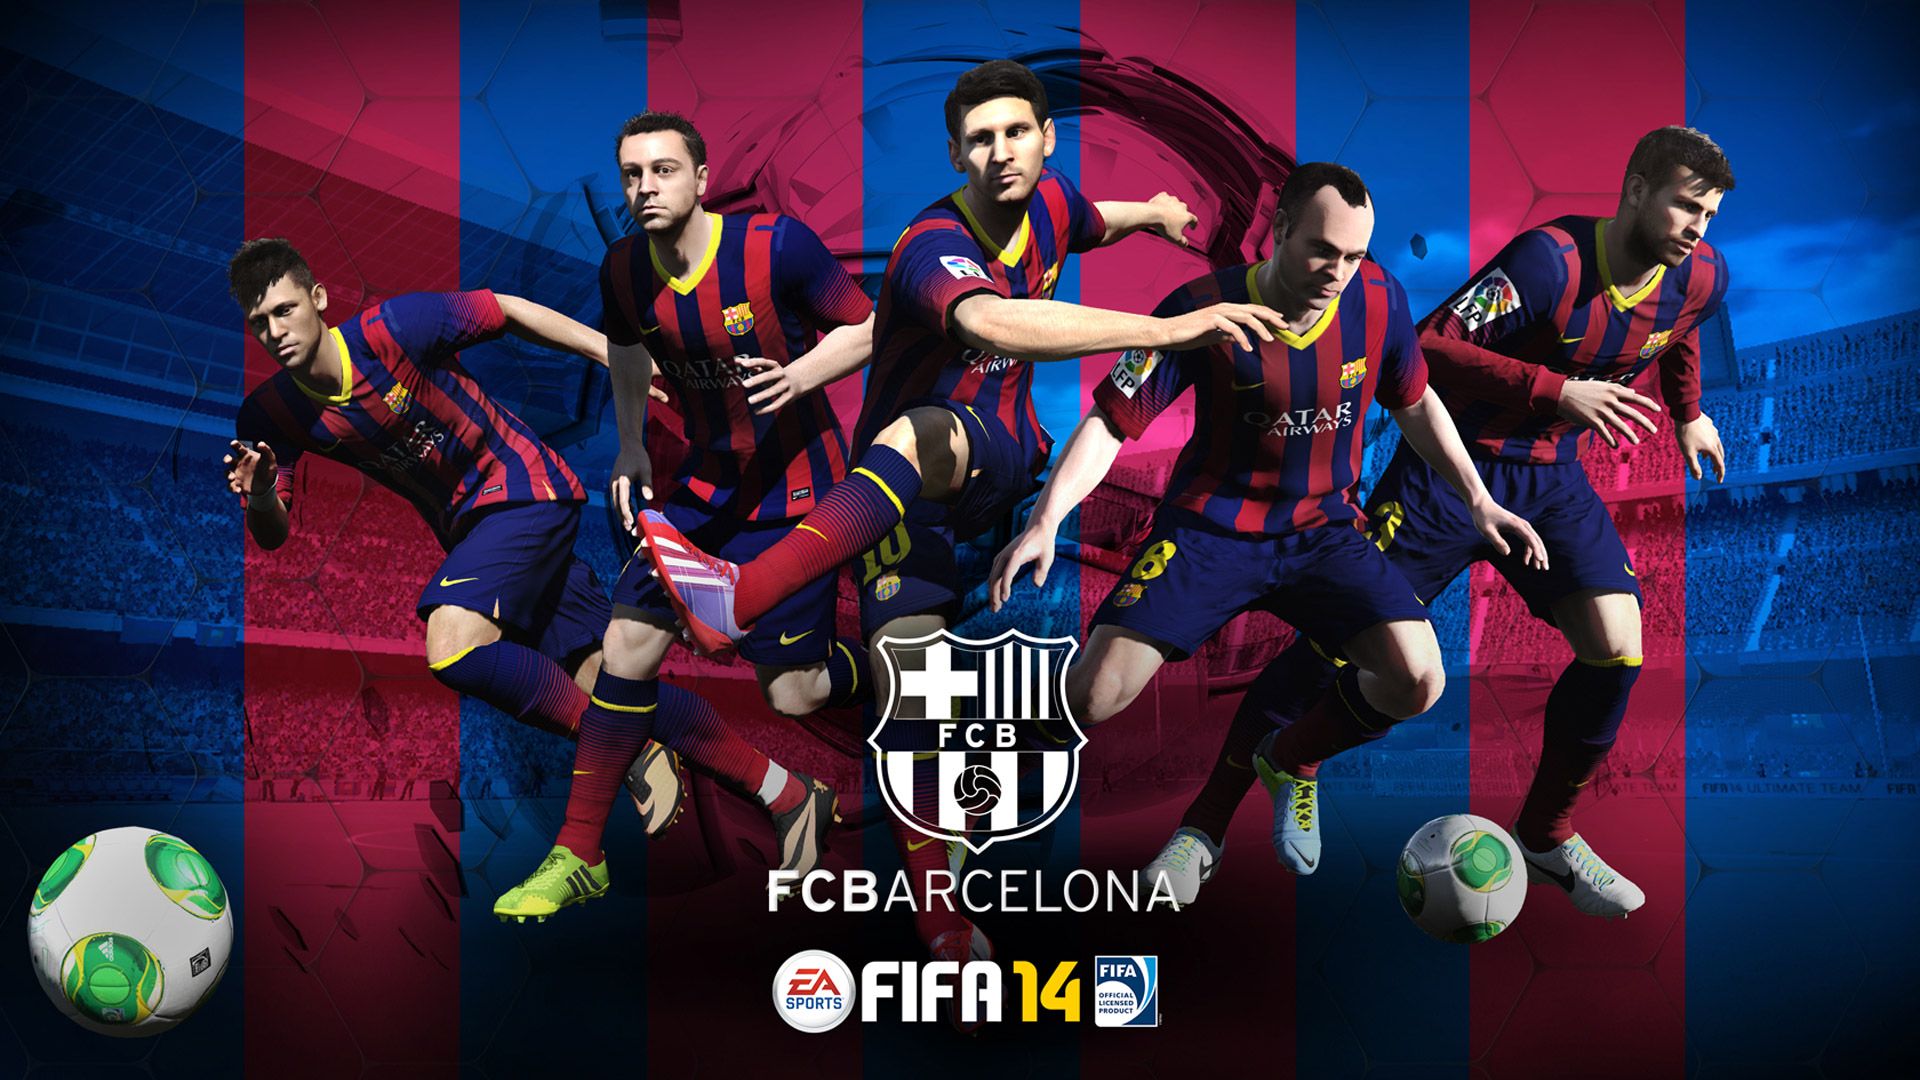 Fifa Game hd Wallpapers 1080p Widescreen Wallpapers High